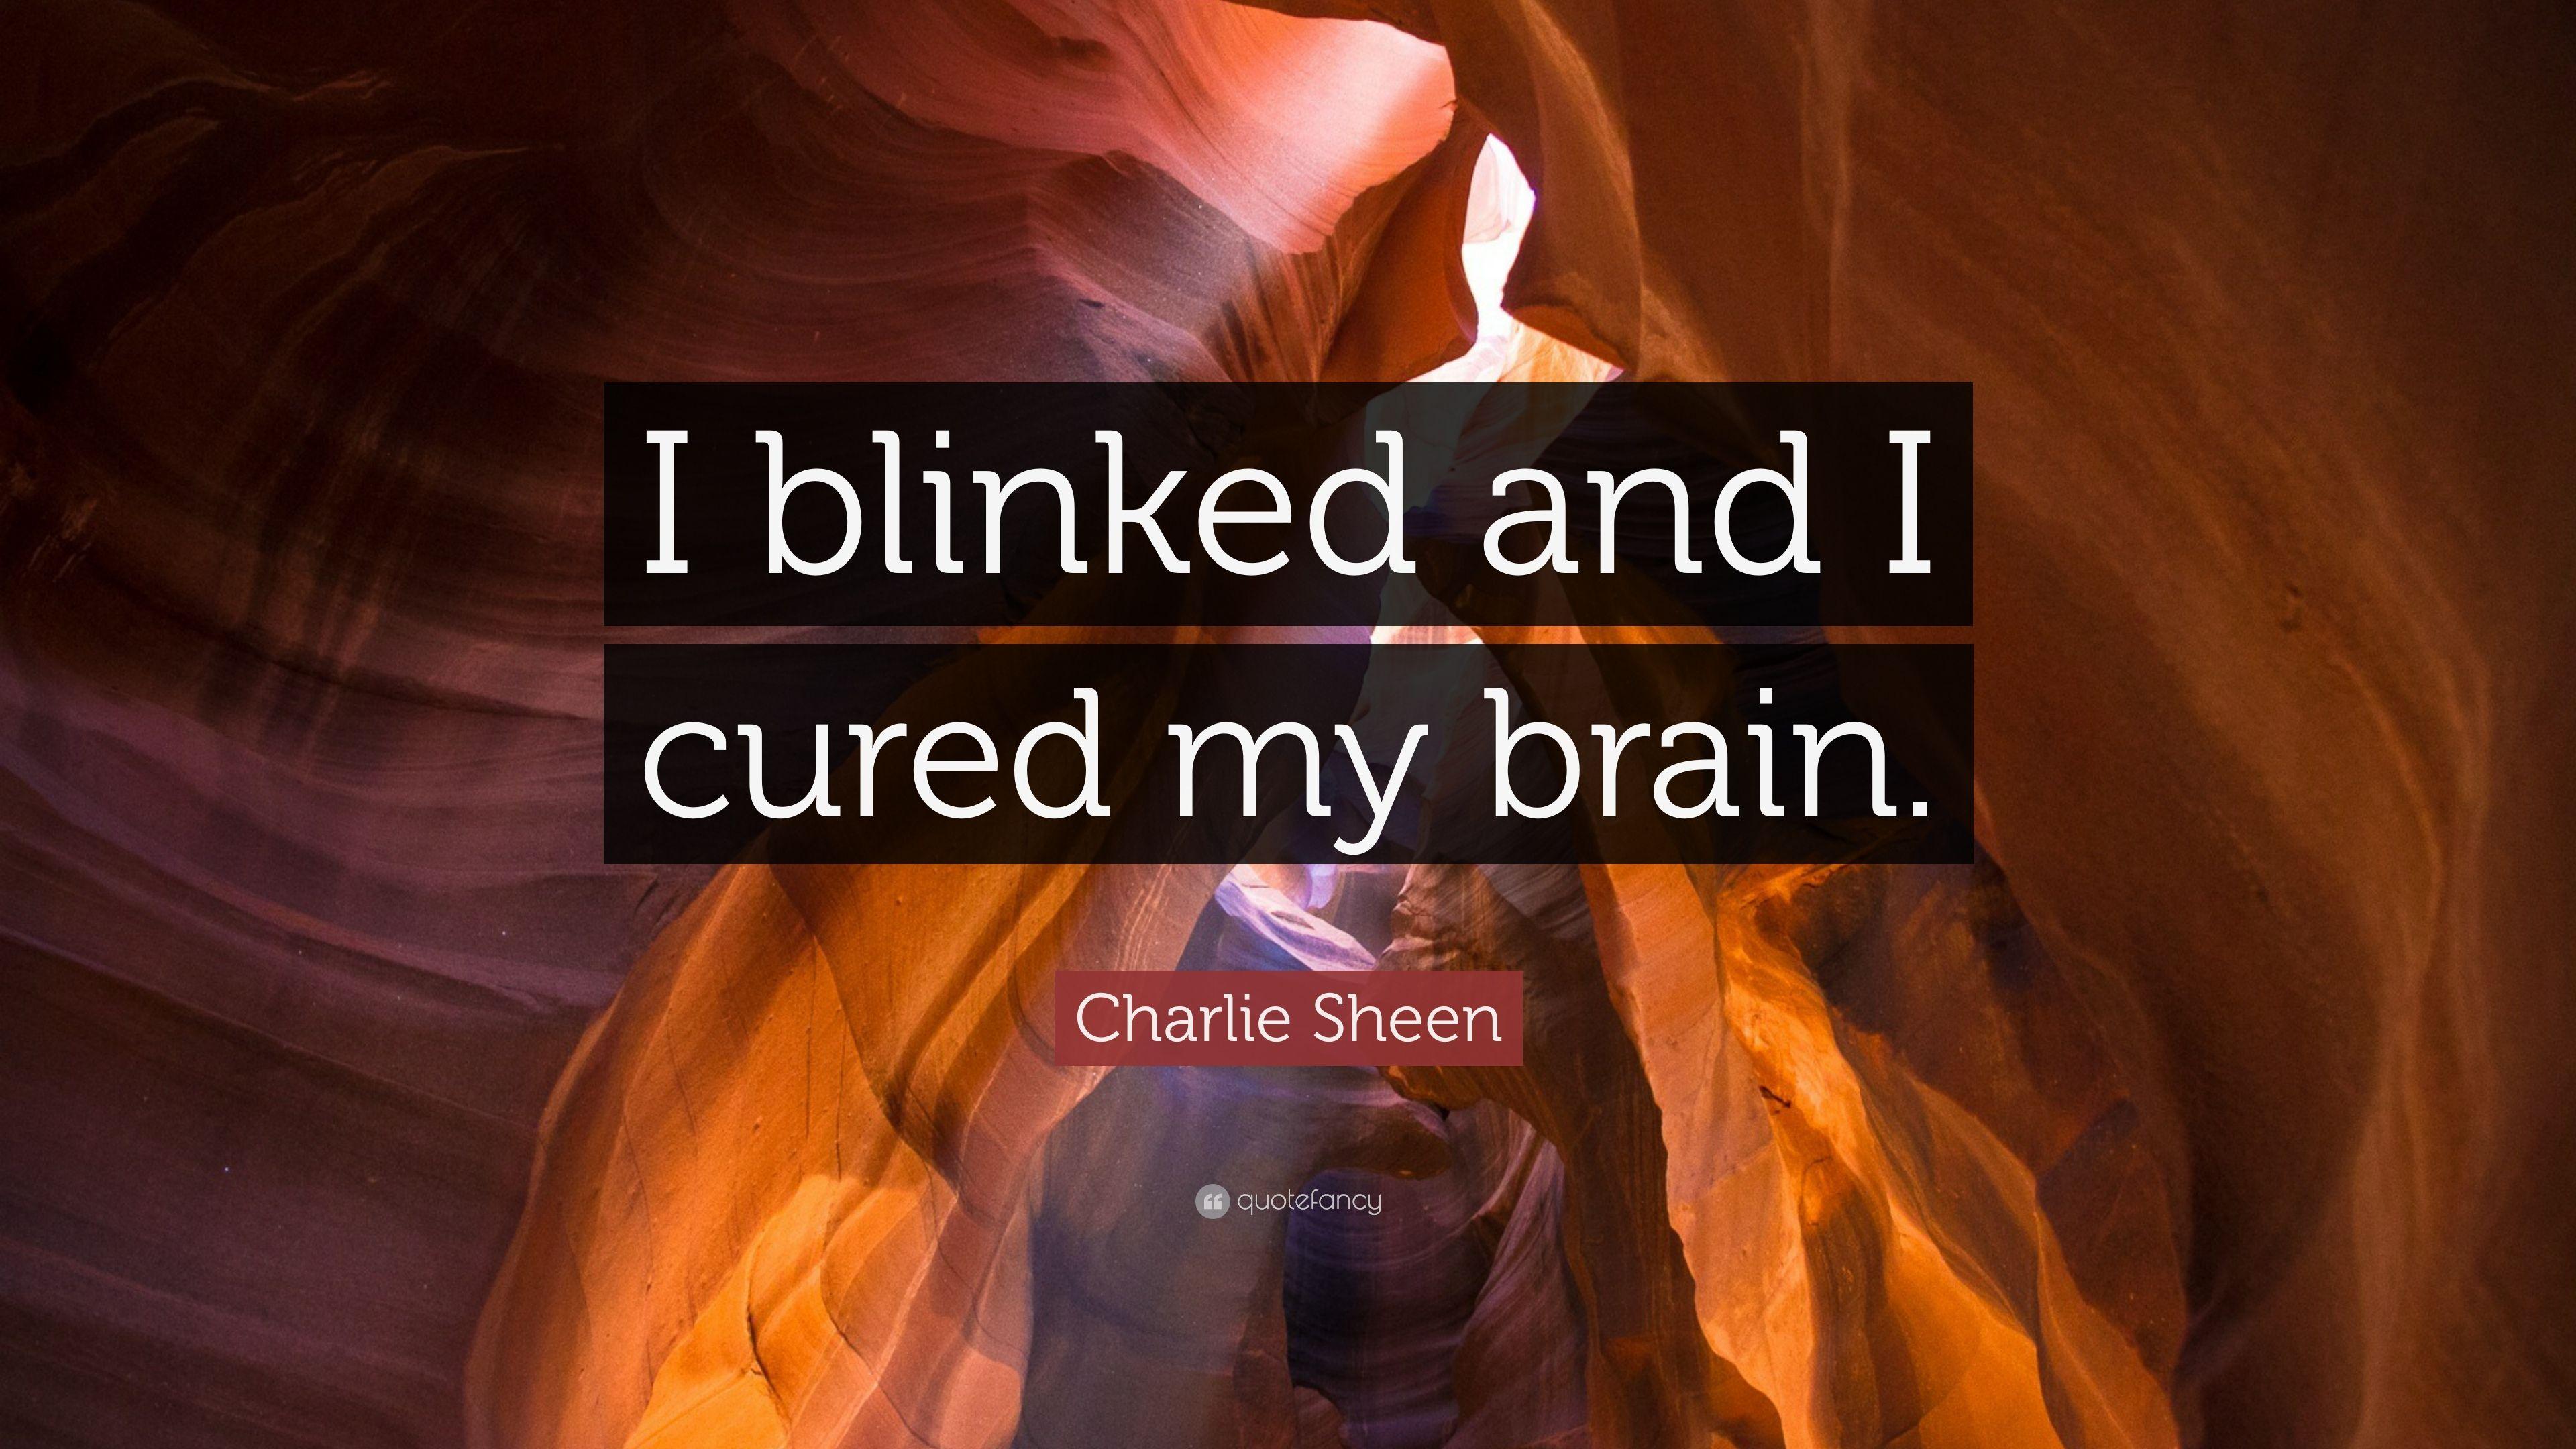 Charlie Sheen Quote: “I blinked and I cured my brain.” 7 wallpaper